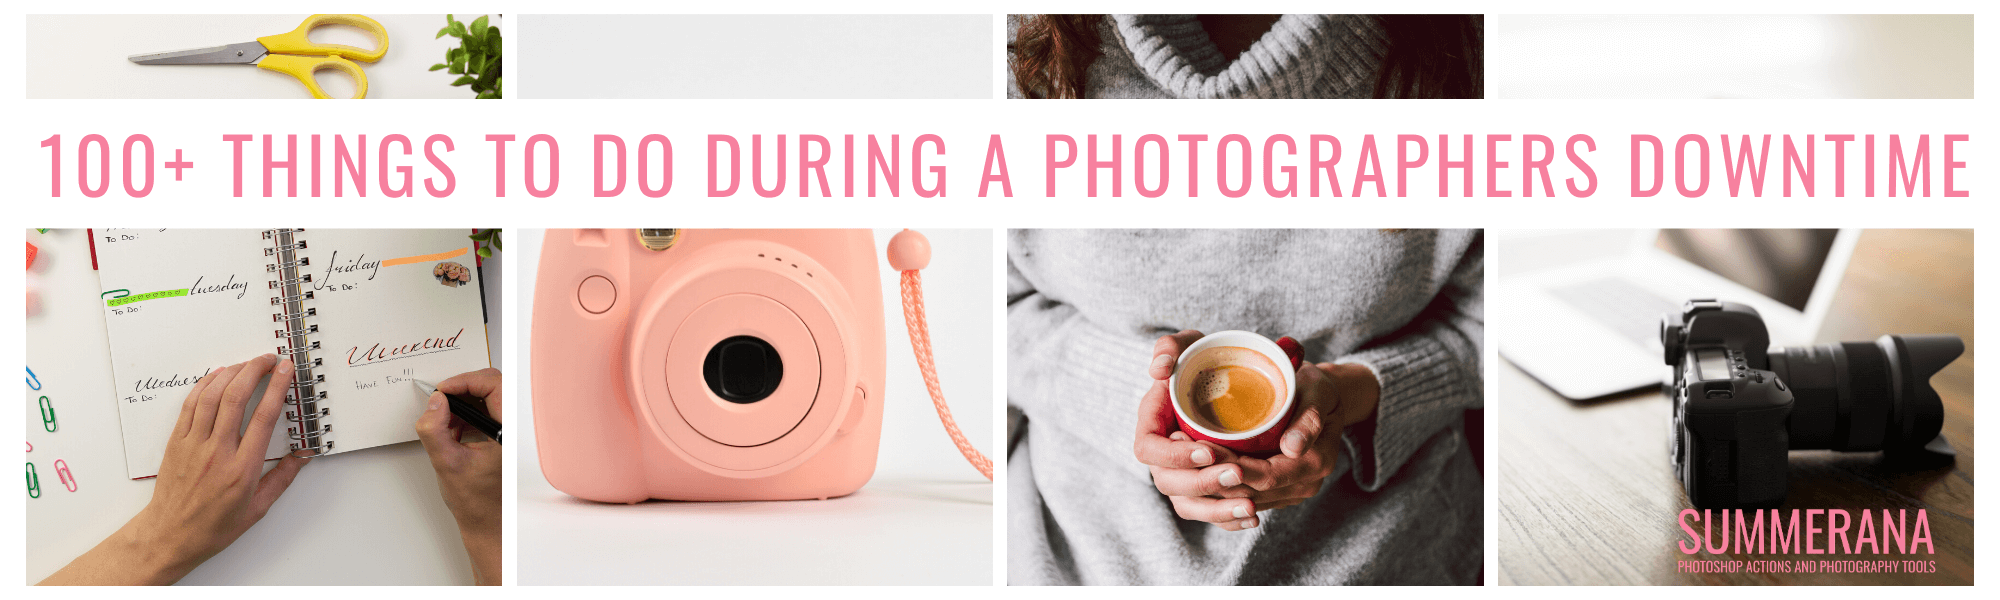 100+ things for photographers to do in downtime